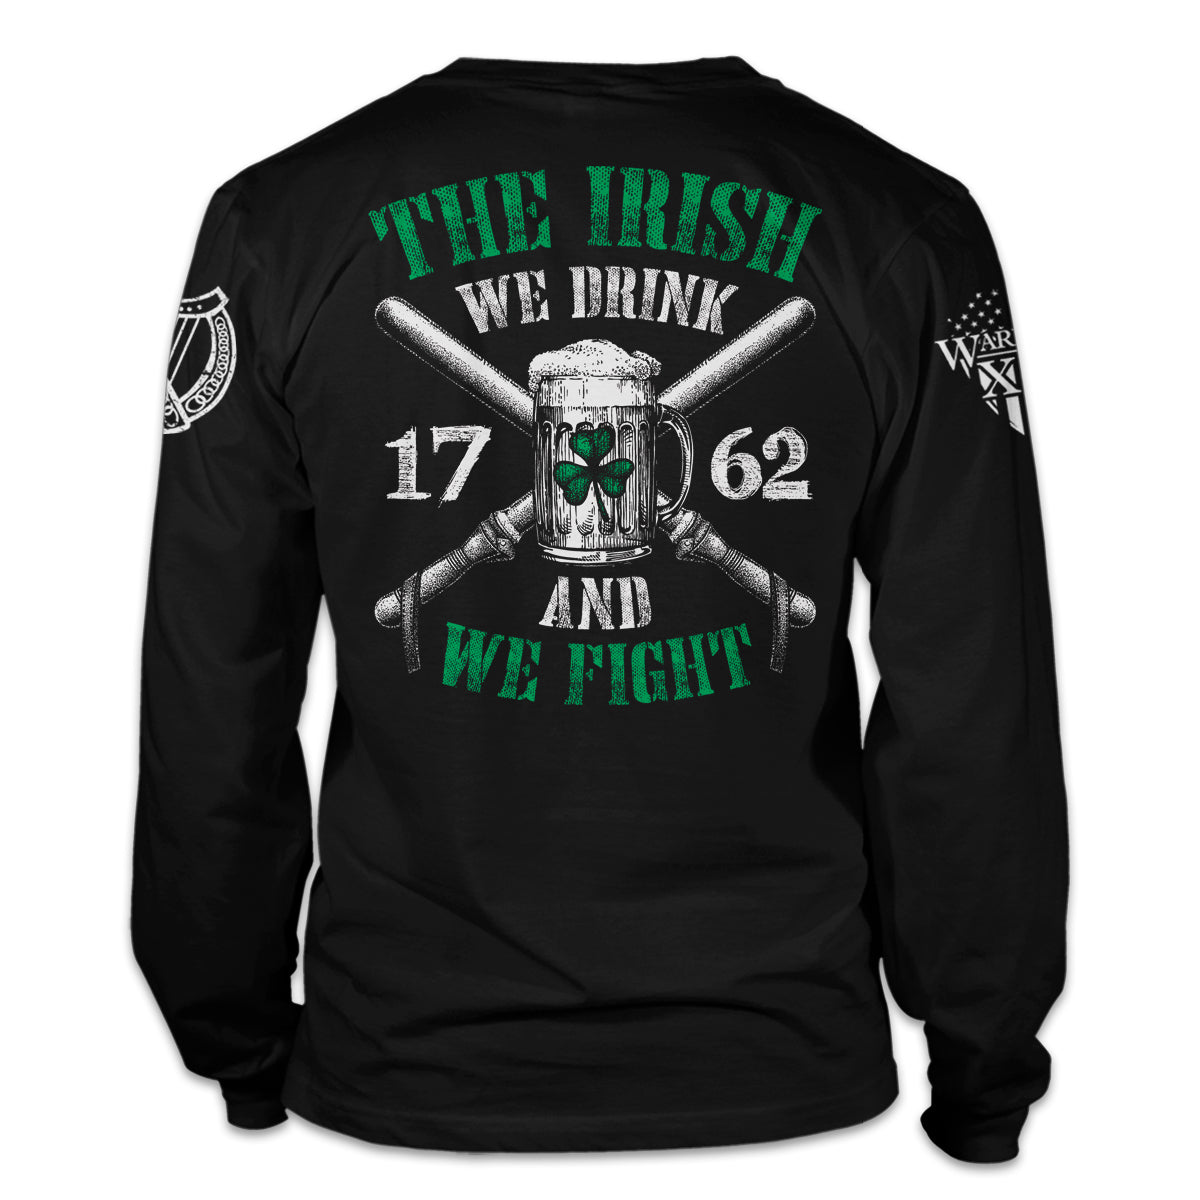 A black long sleeve shirt with the words "The Irish - We Drink And We Fight" with an Irish beer mug printed on the back of the  shirt.